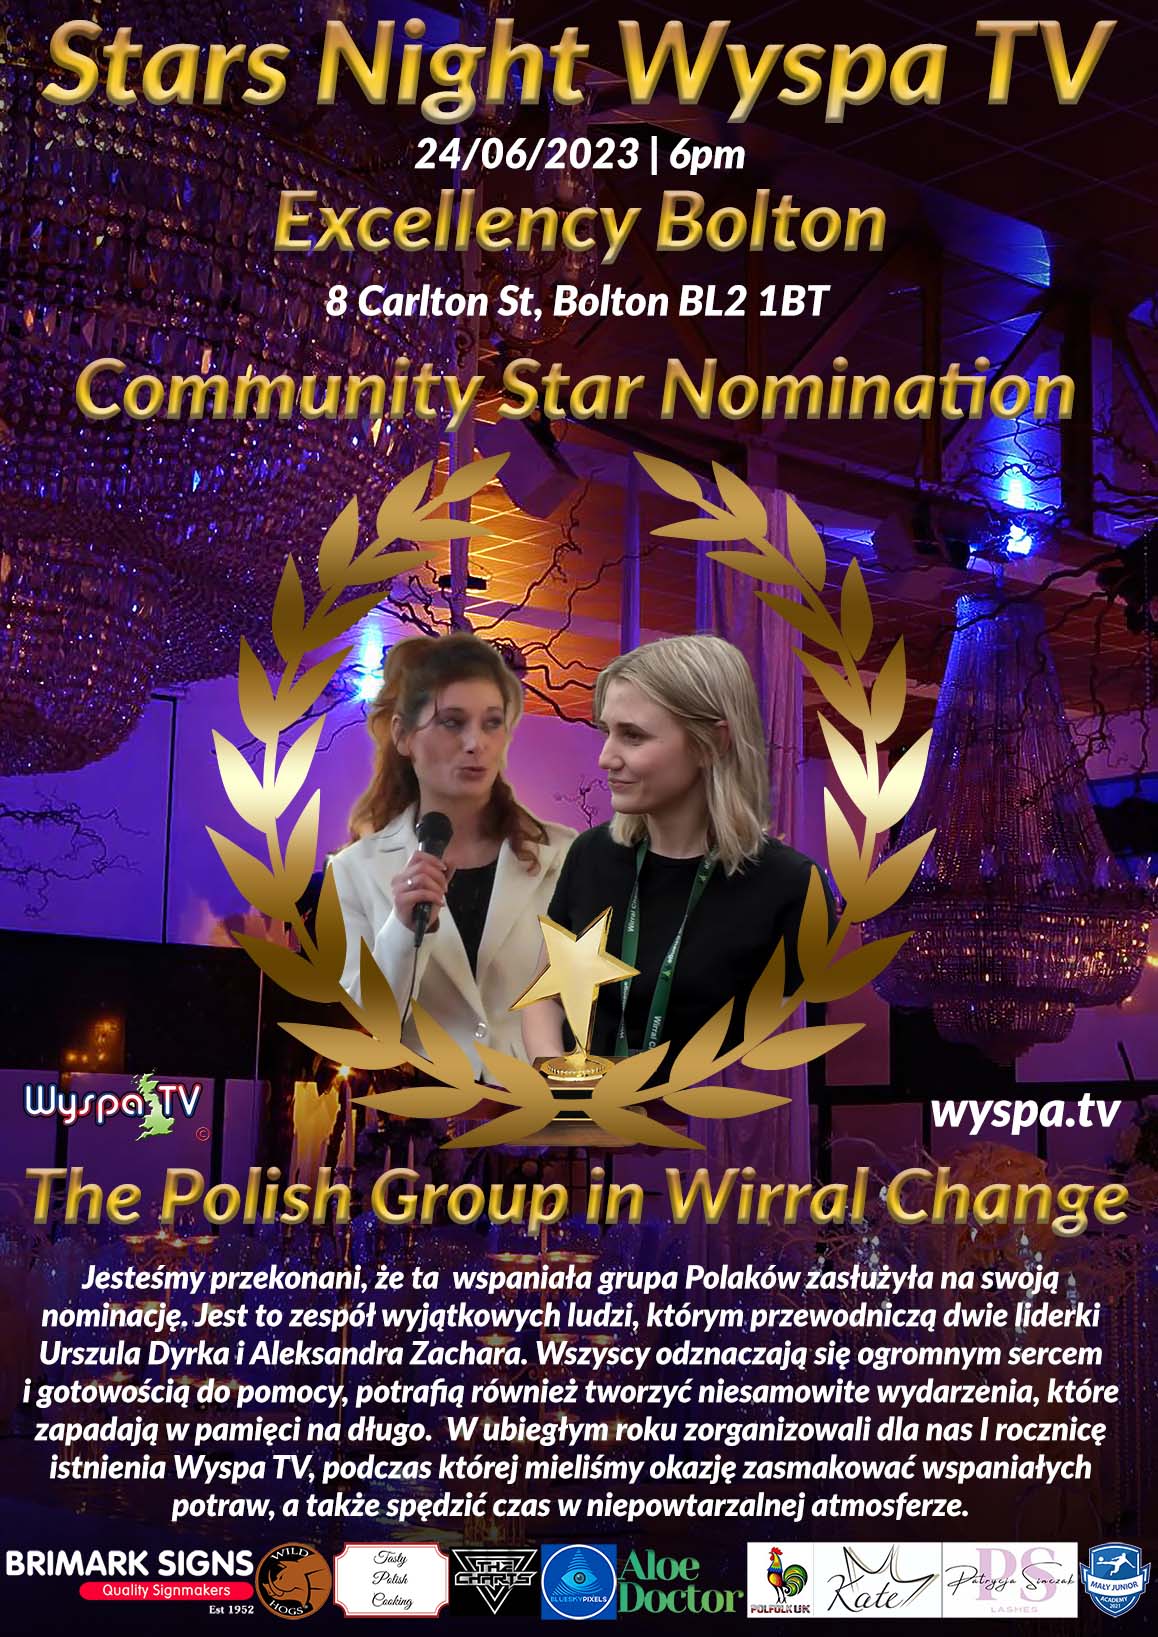 The Polish Group in Wirral Change